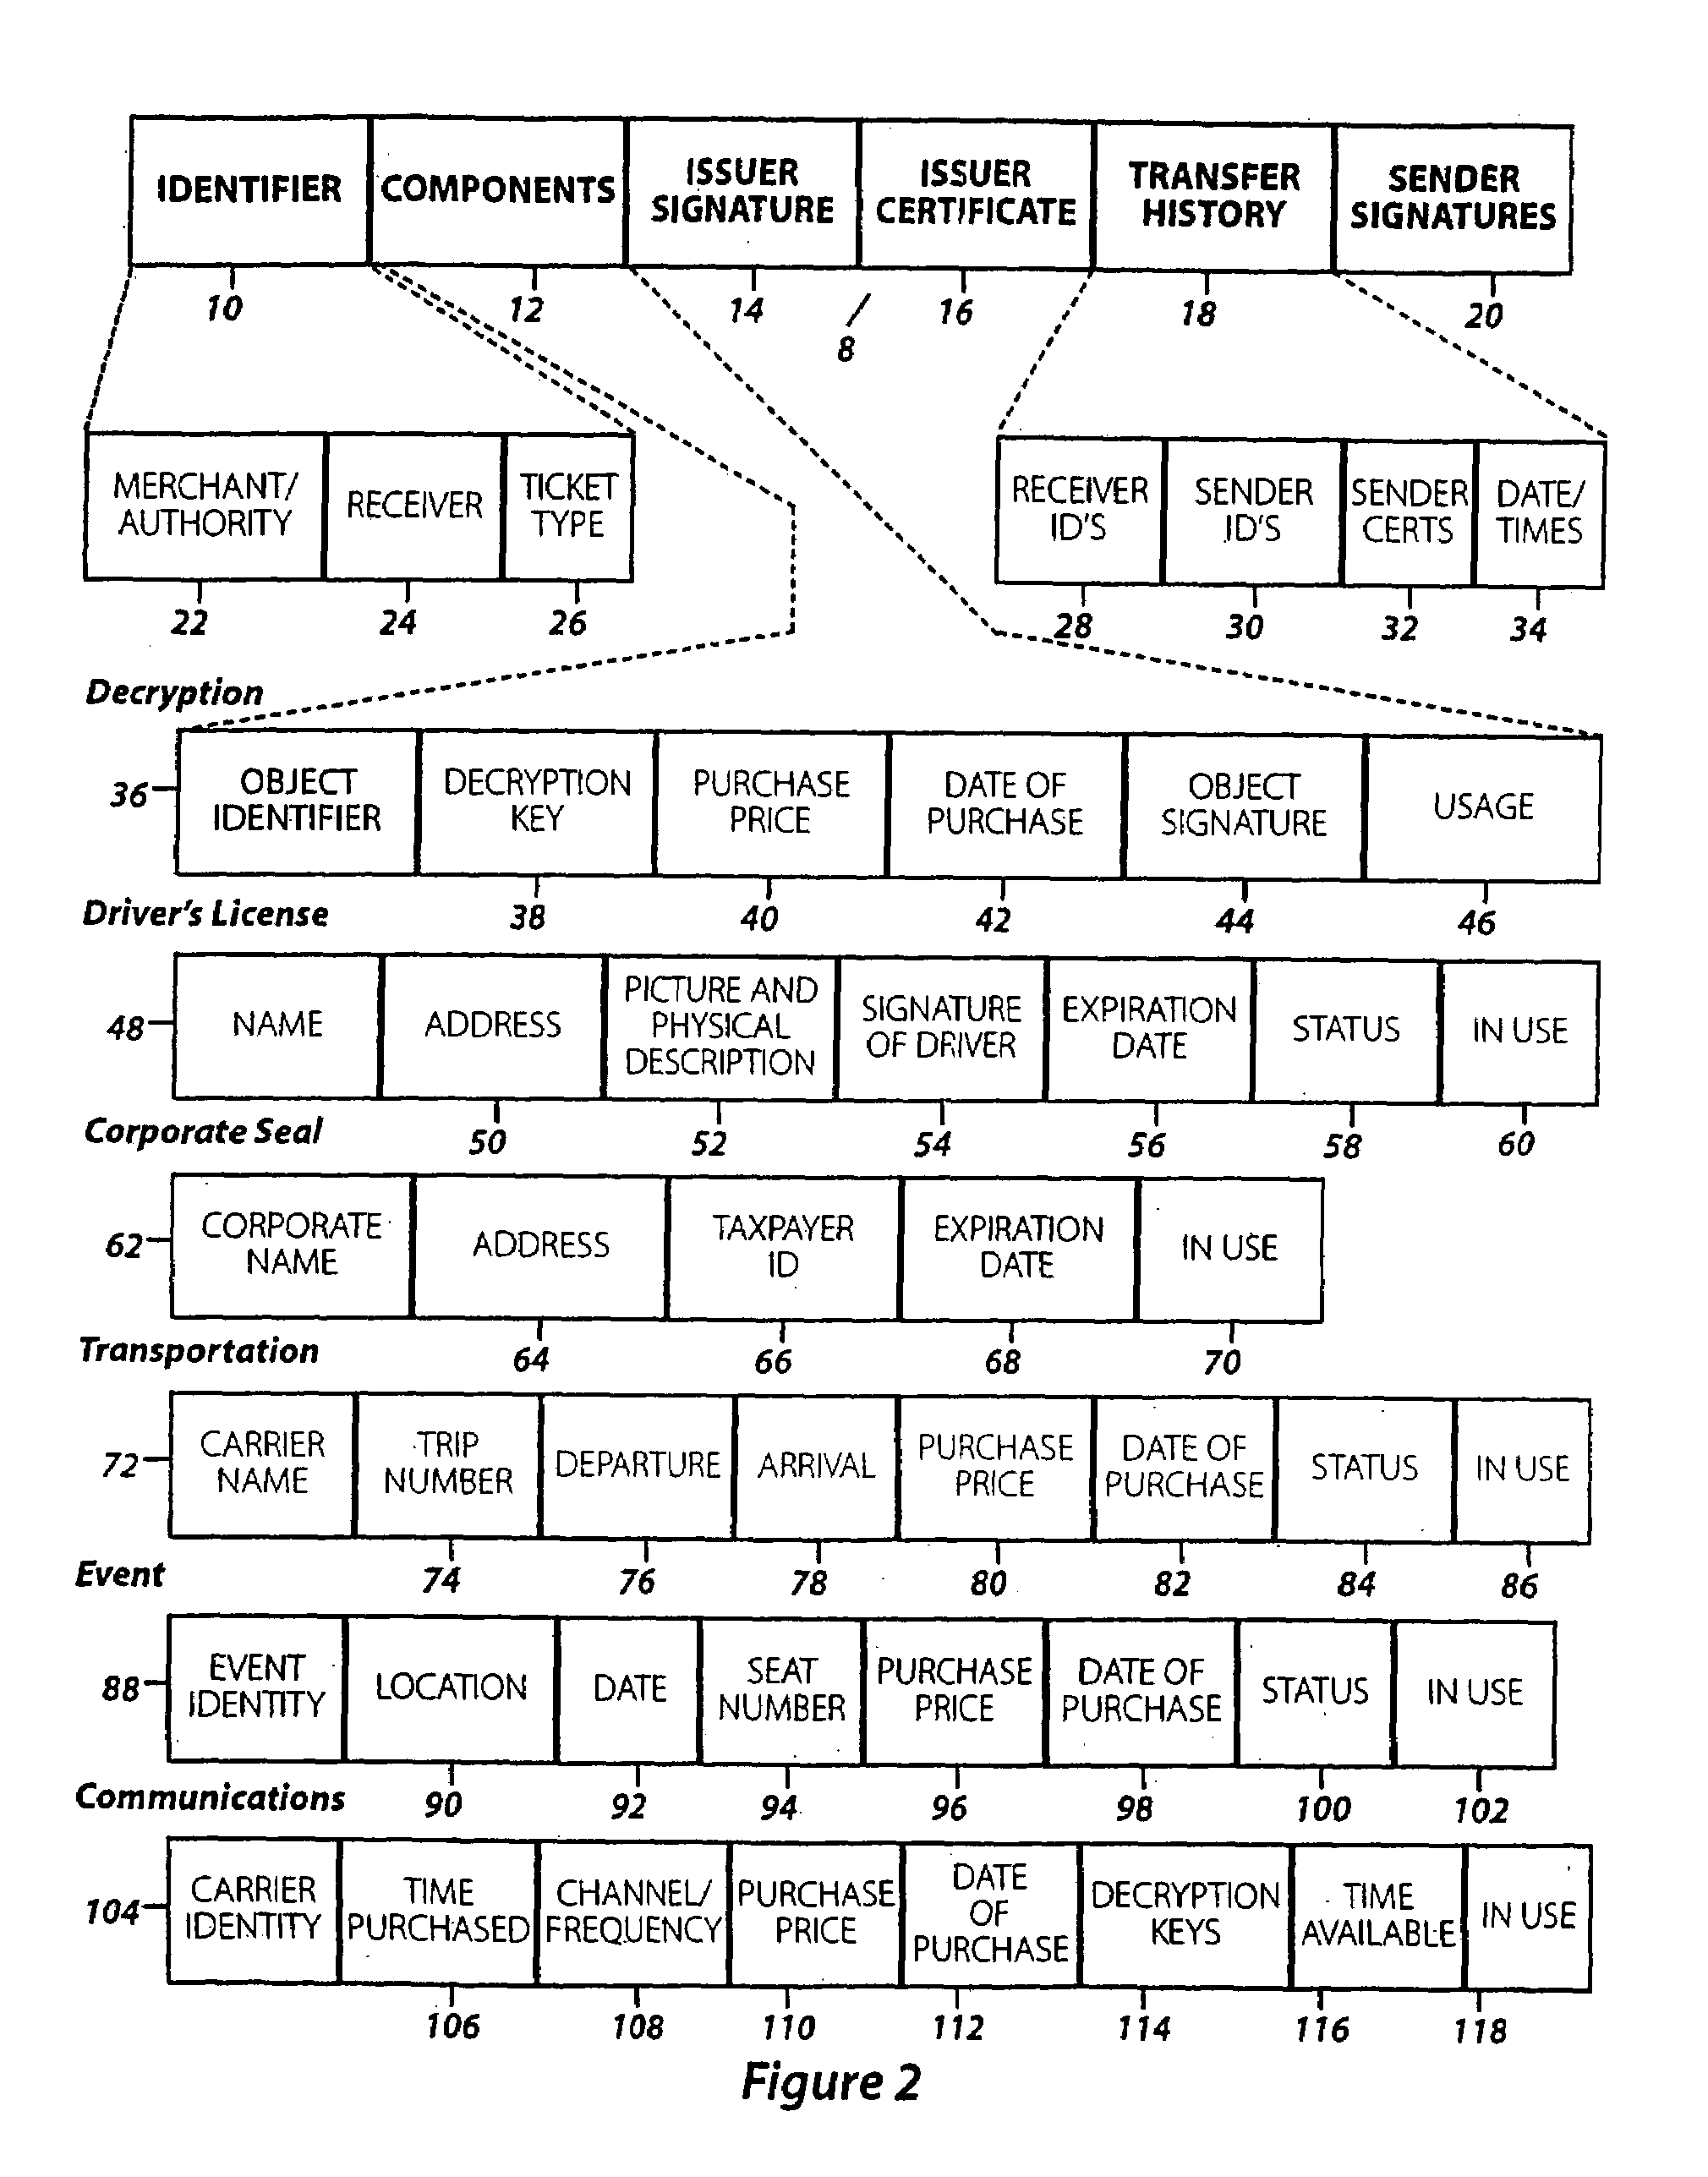 Electronic transaction apparatus for electronic commerce